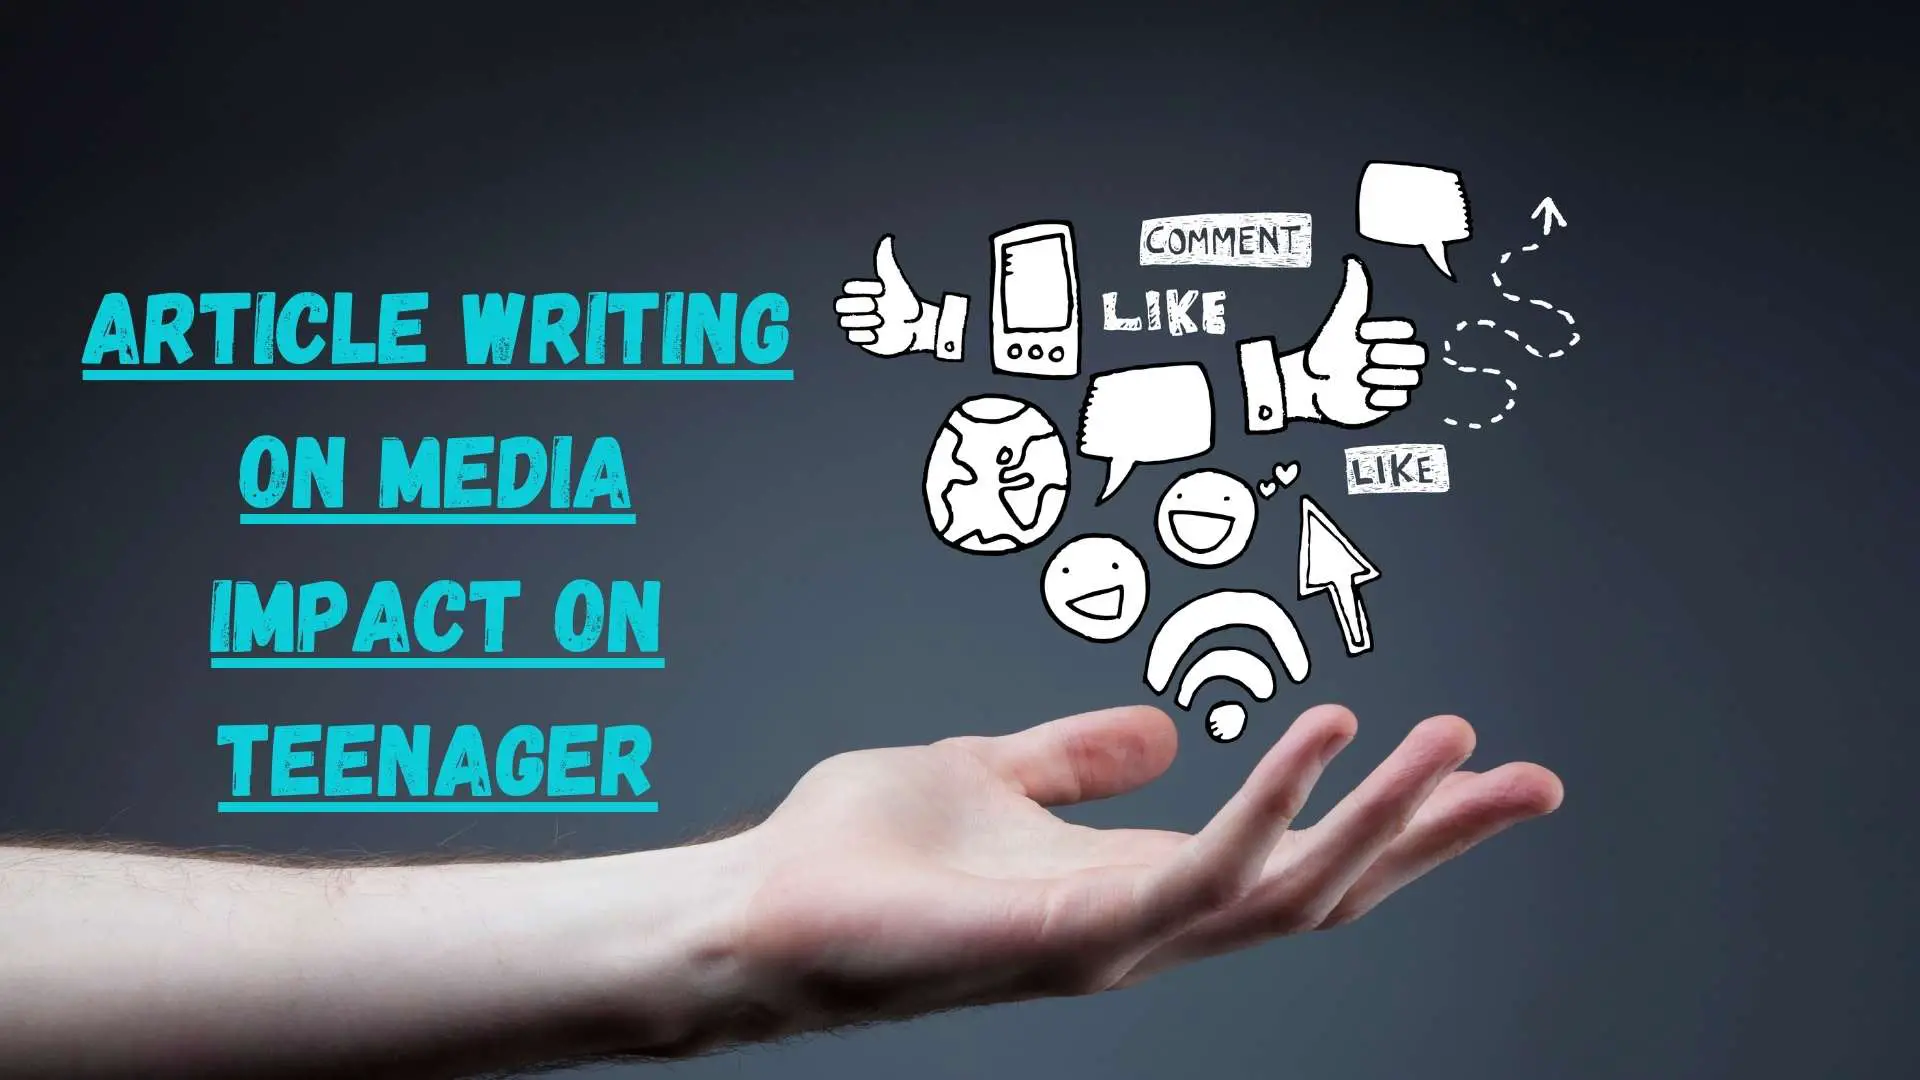 Best Article Writing on Media Impact on Teenager